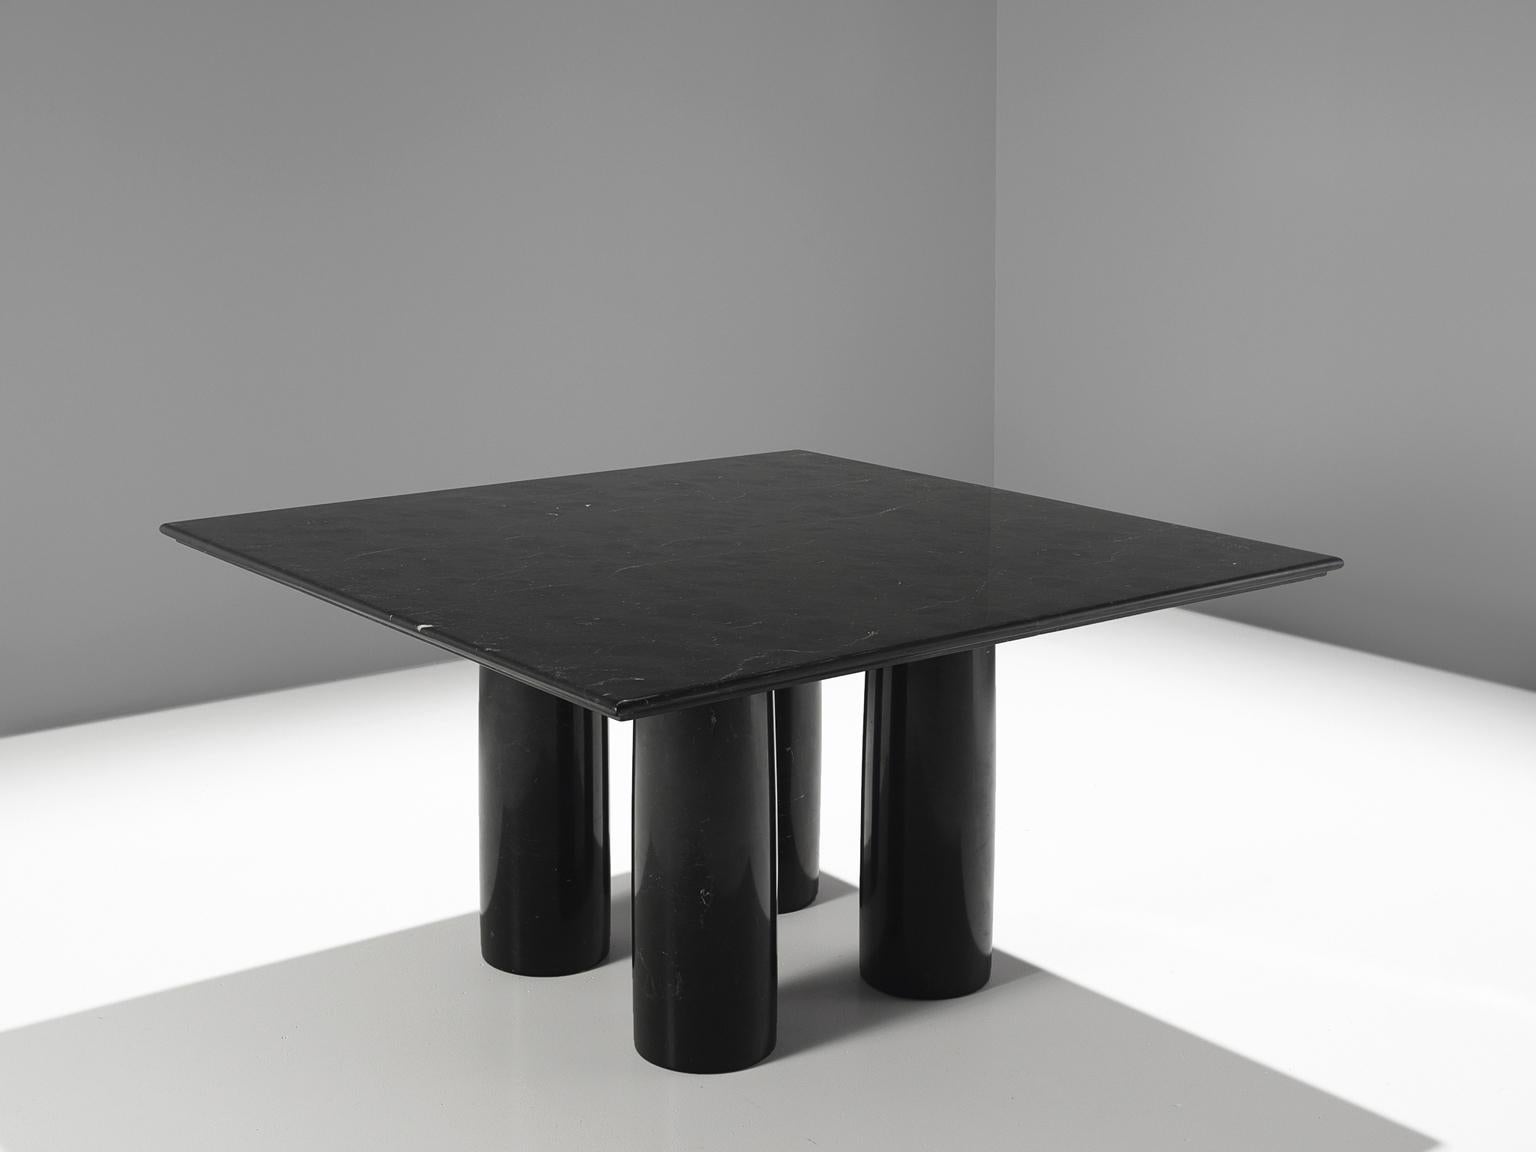 Table 'Il Colonnato', by Mario Bellini for Cassina, in black marble, Italy, 1970s.

This 'Il Colonnato' dining table was designed by Italian designer Mario Bellini. For this series of tables, Bellini was inspired by ancient Roman columns. This